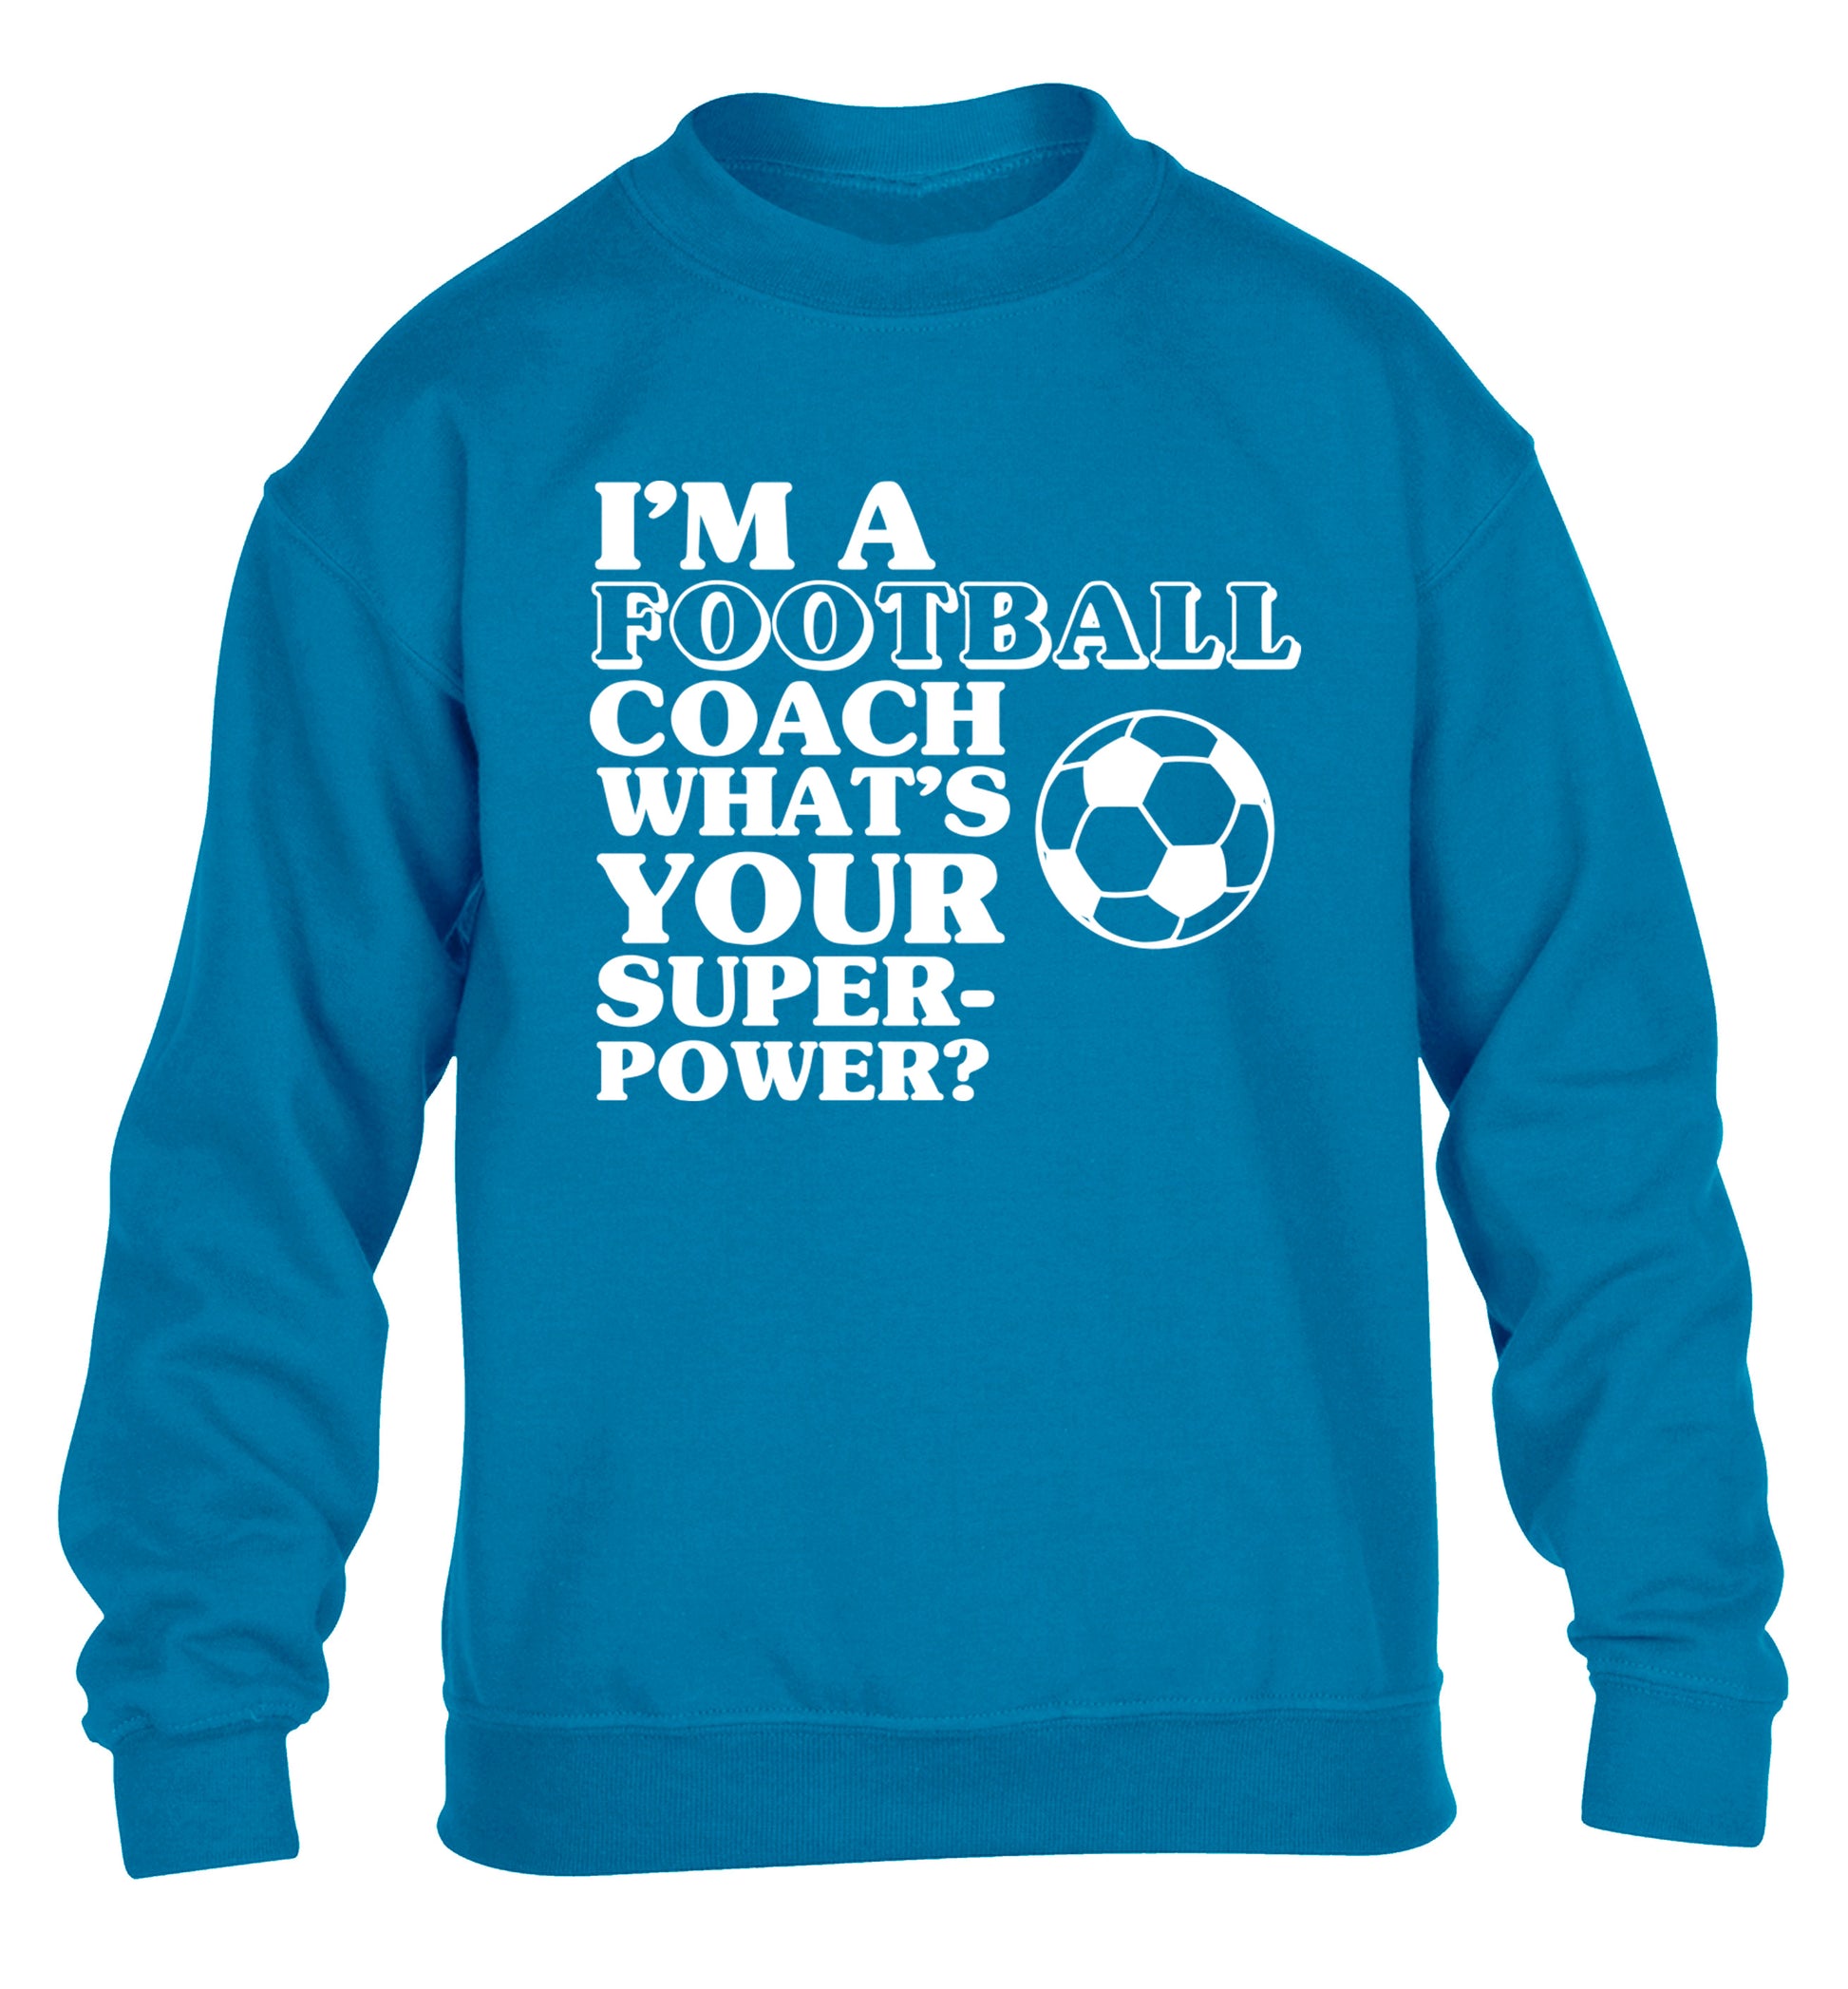 I'm a football coach what's your superpower? children's blue sweater 12-14 Years